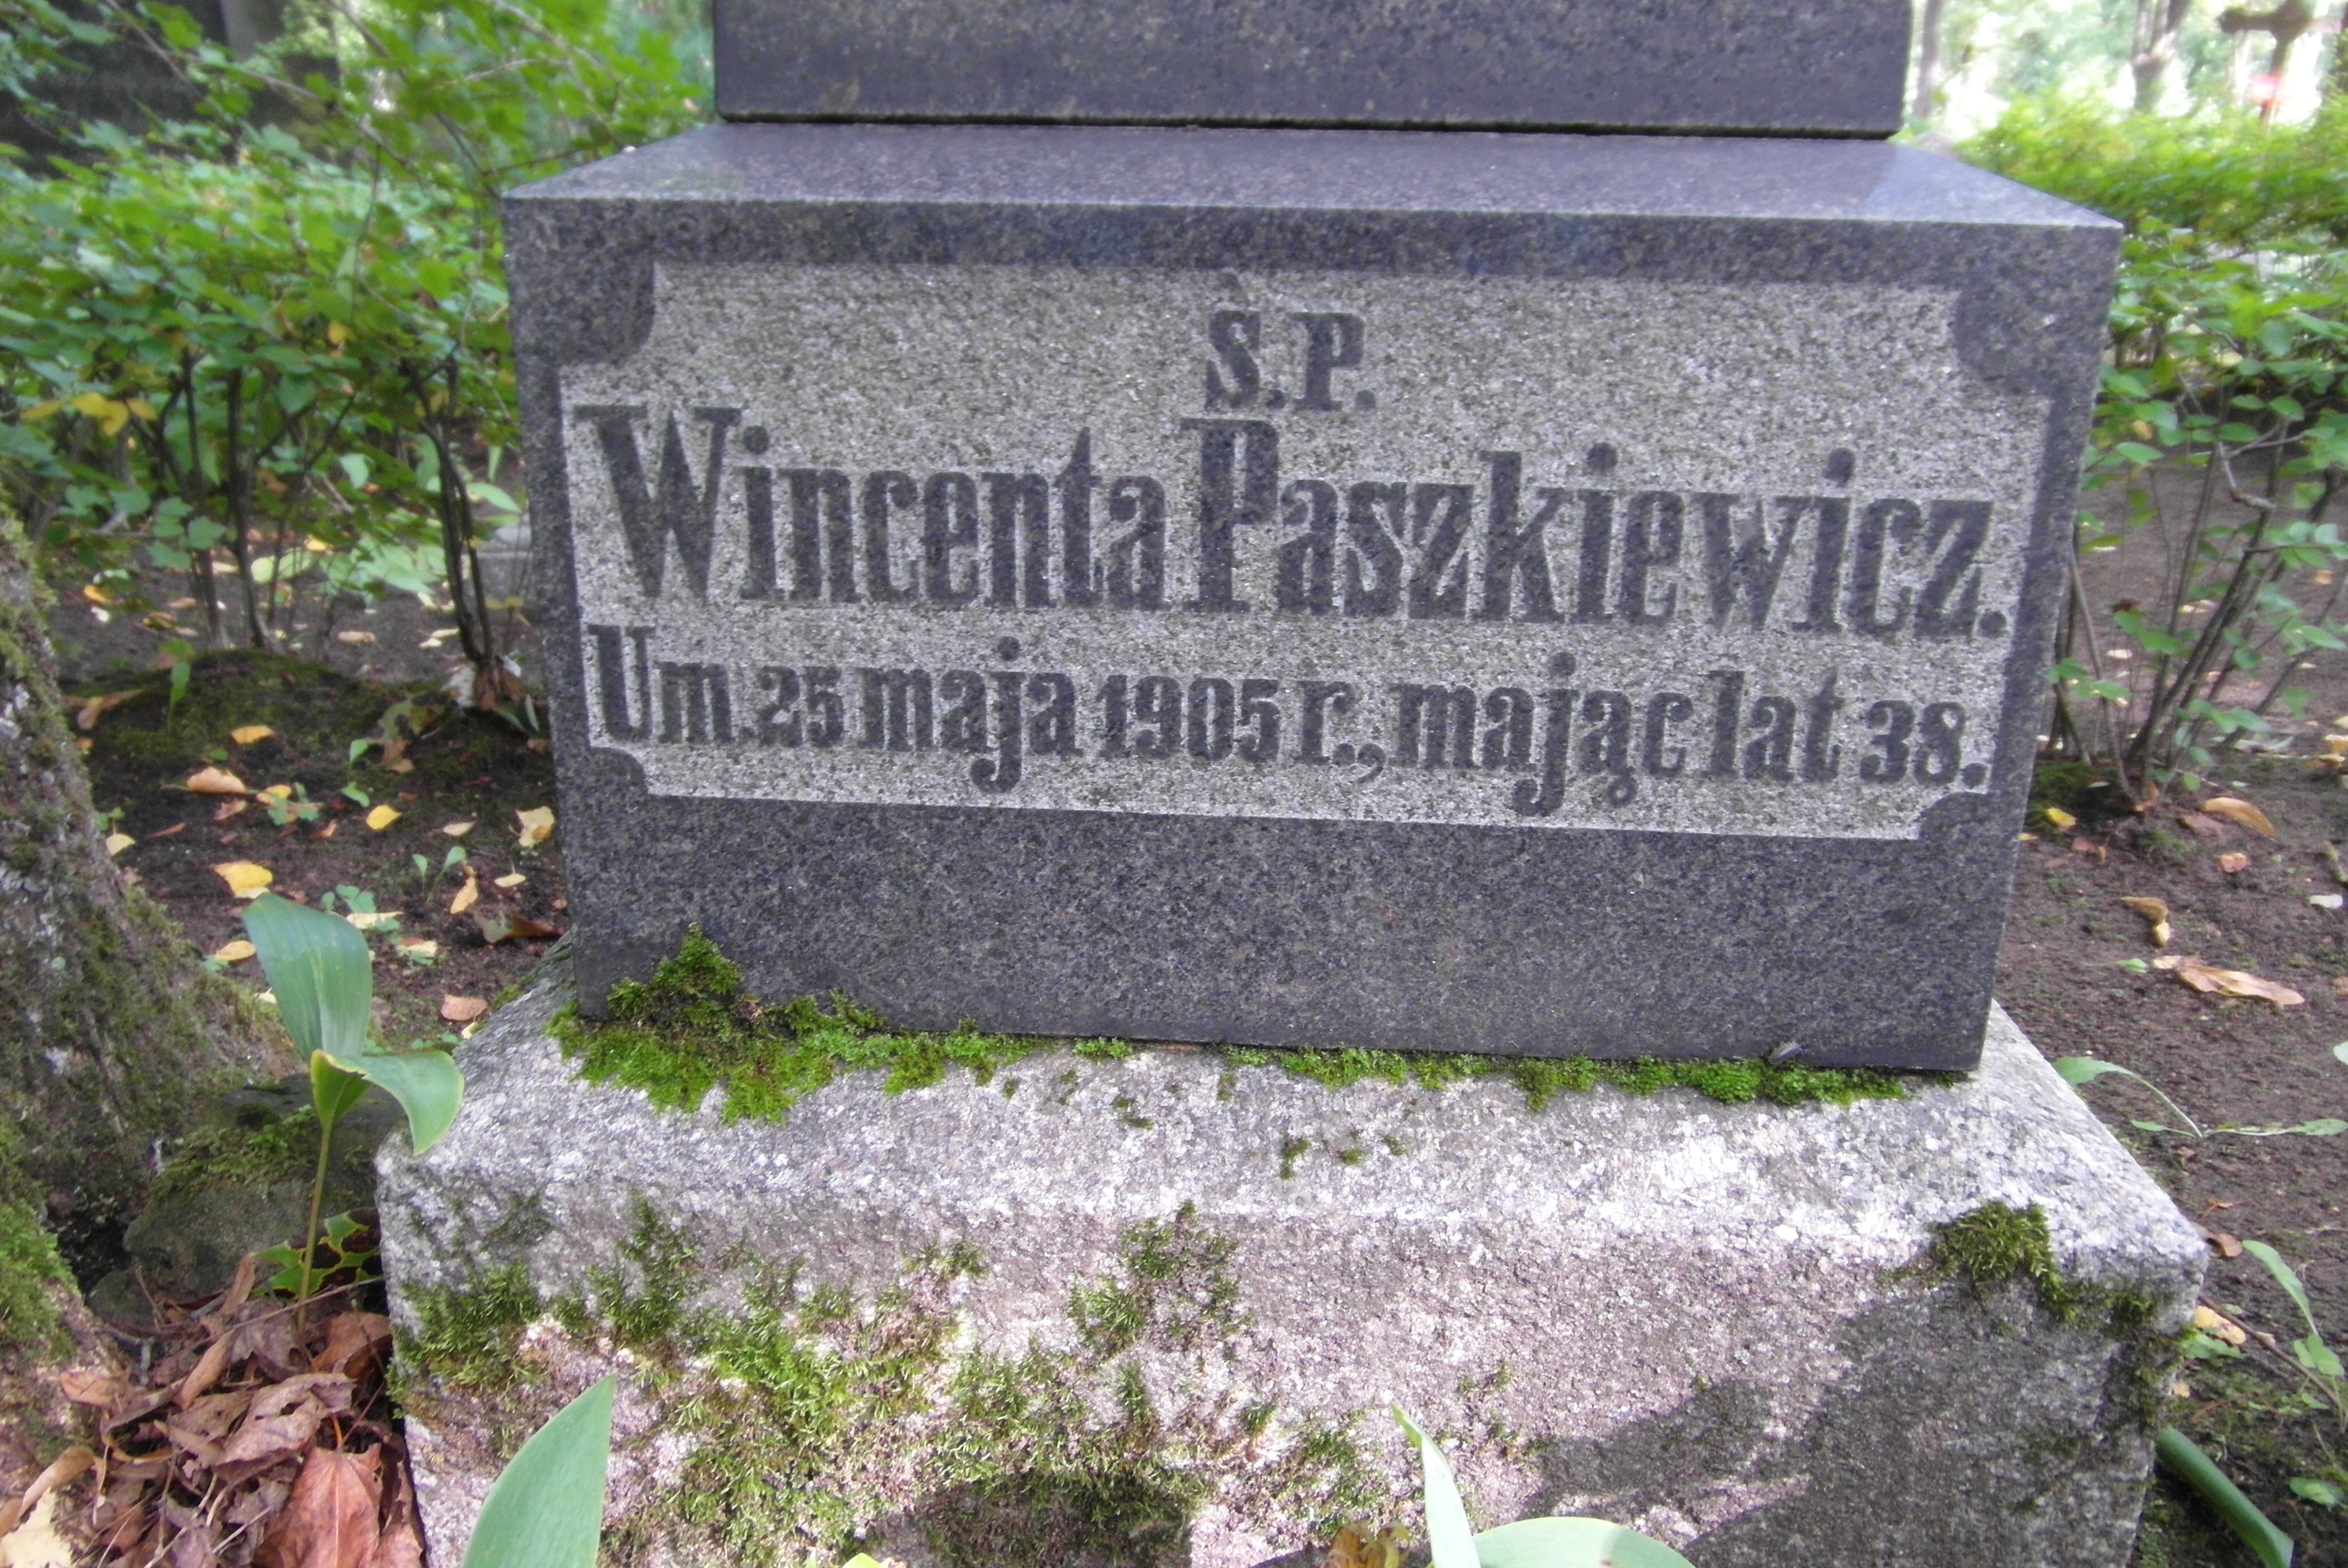 Inscription from the tombstone of Wanda Paszkiewicz, St Michael's cemetery in Riga, as of 2021.